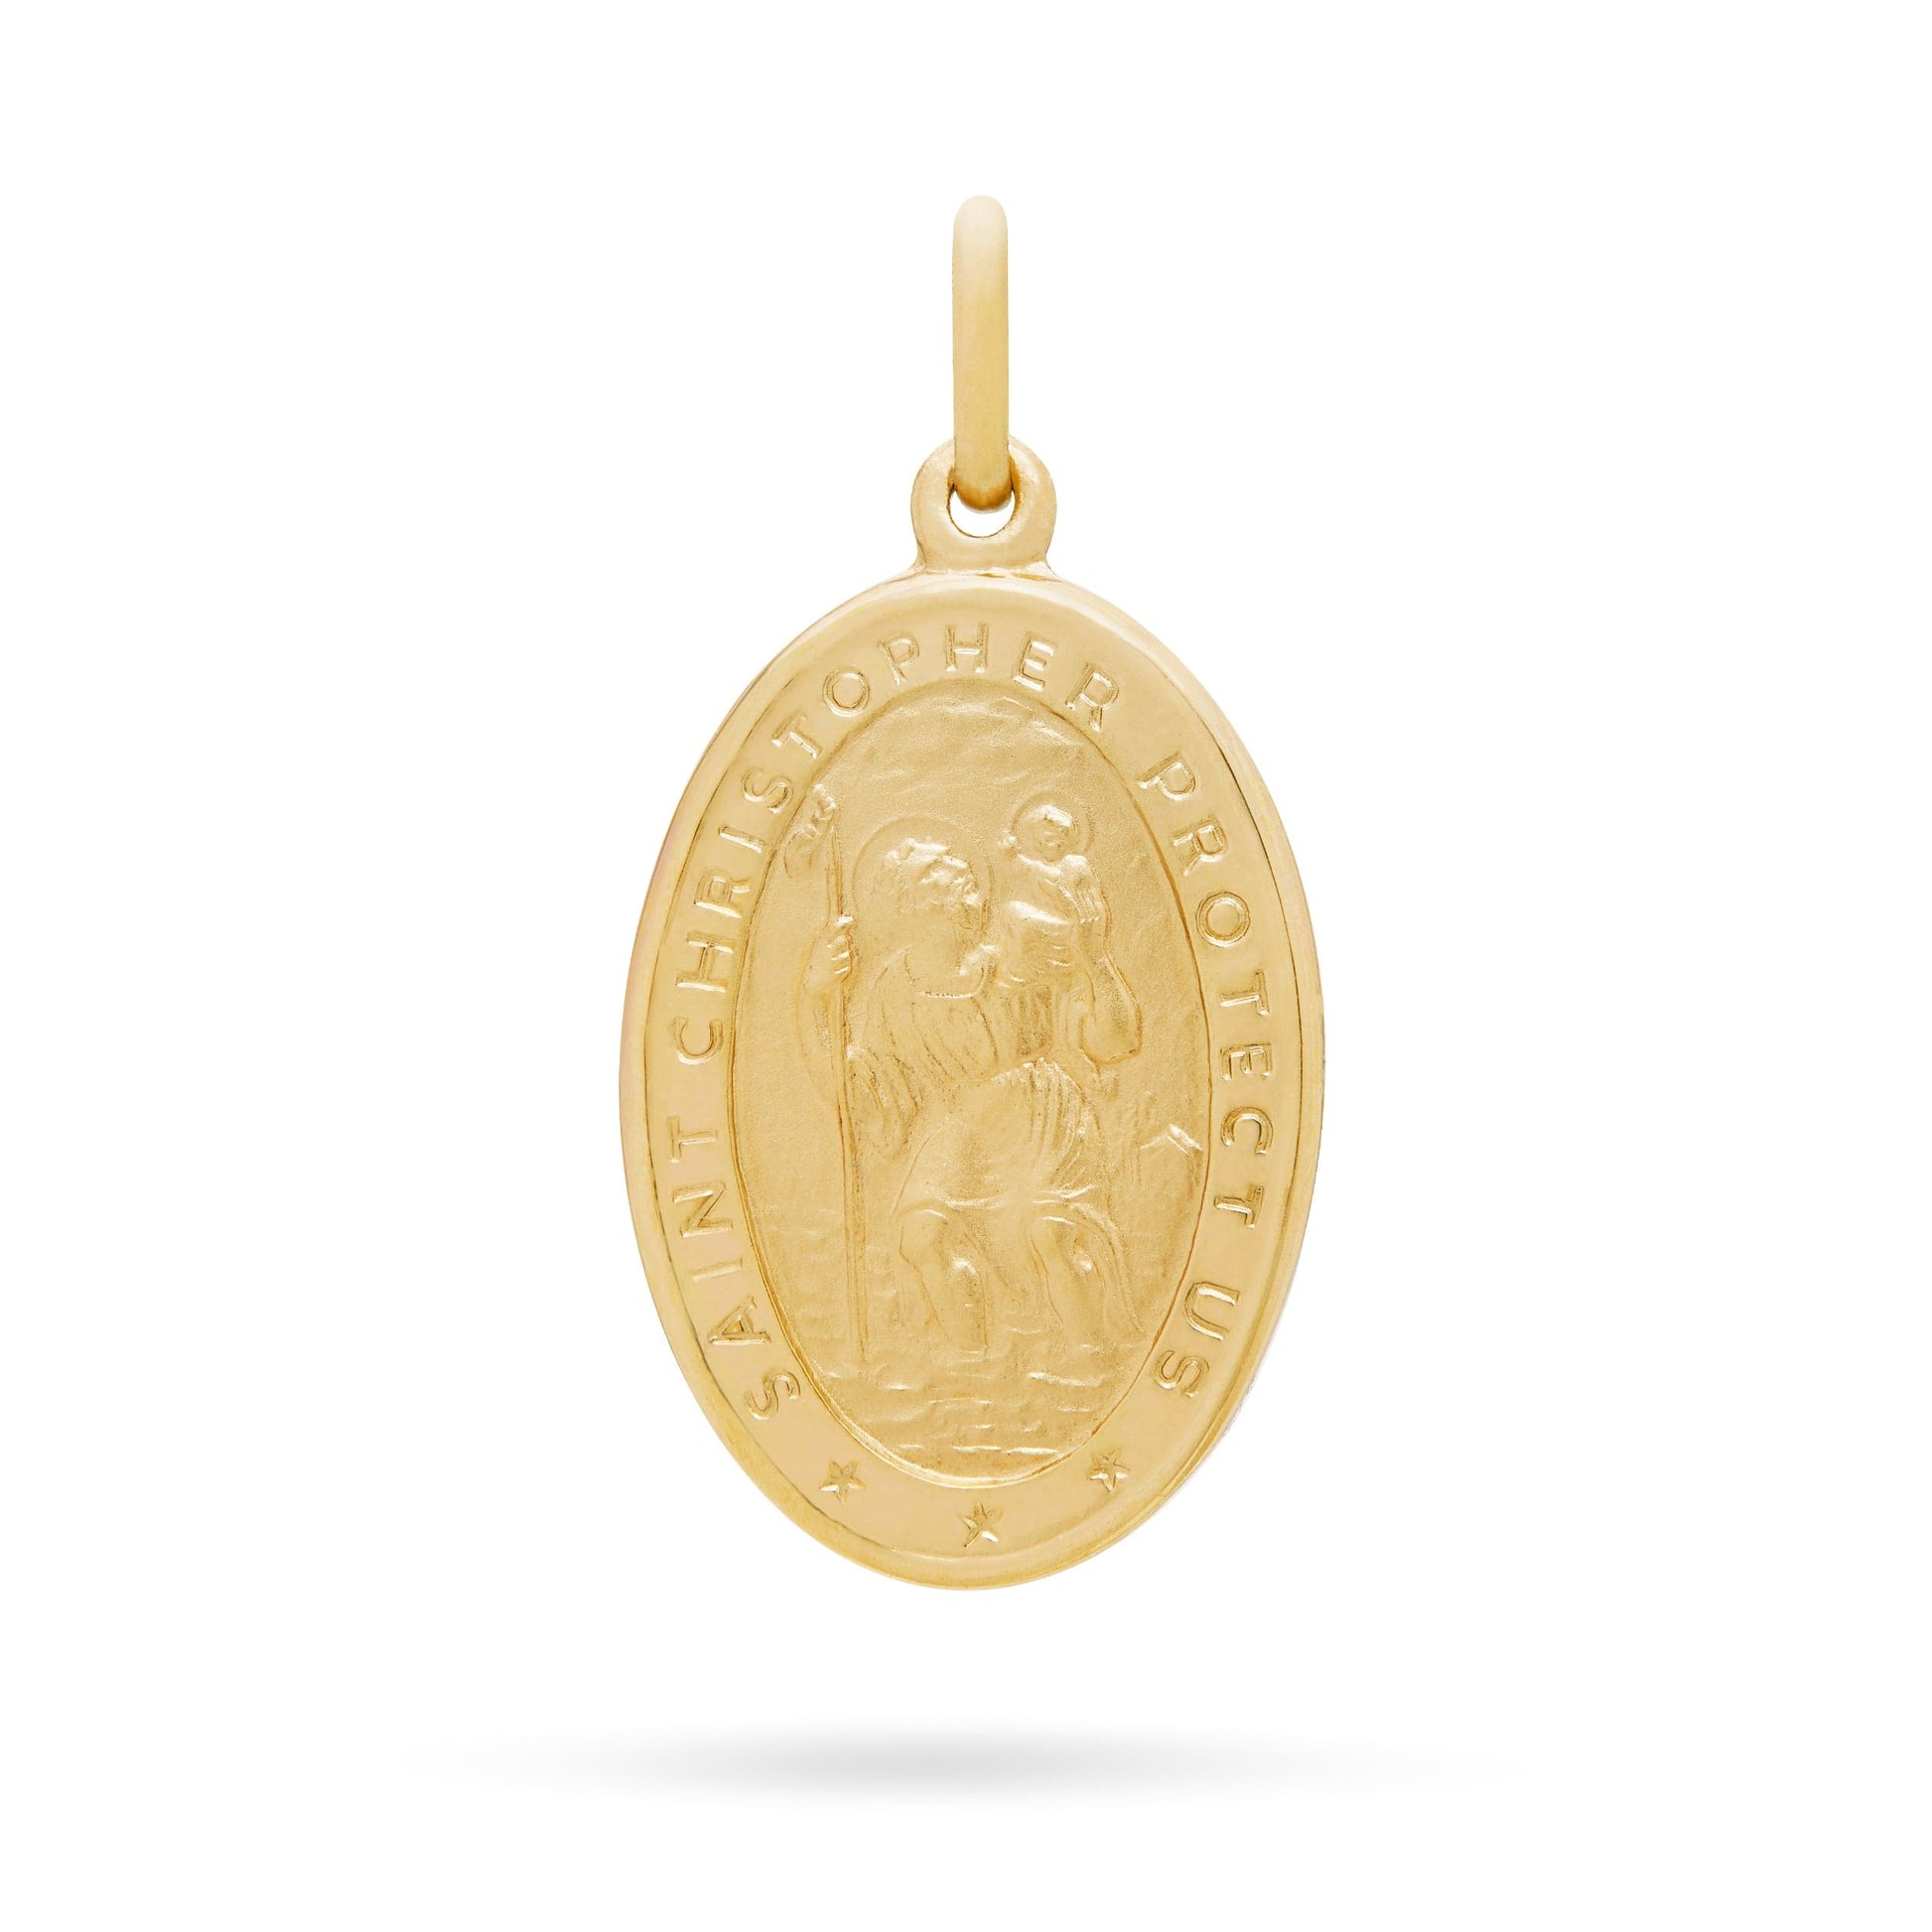 MONDO CATTOLICO Jewelry 16 mm (0.62 in) Saint Christopher Yellow Gold Oval Medal